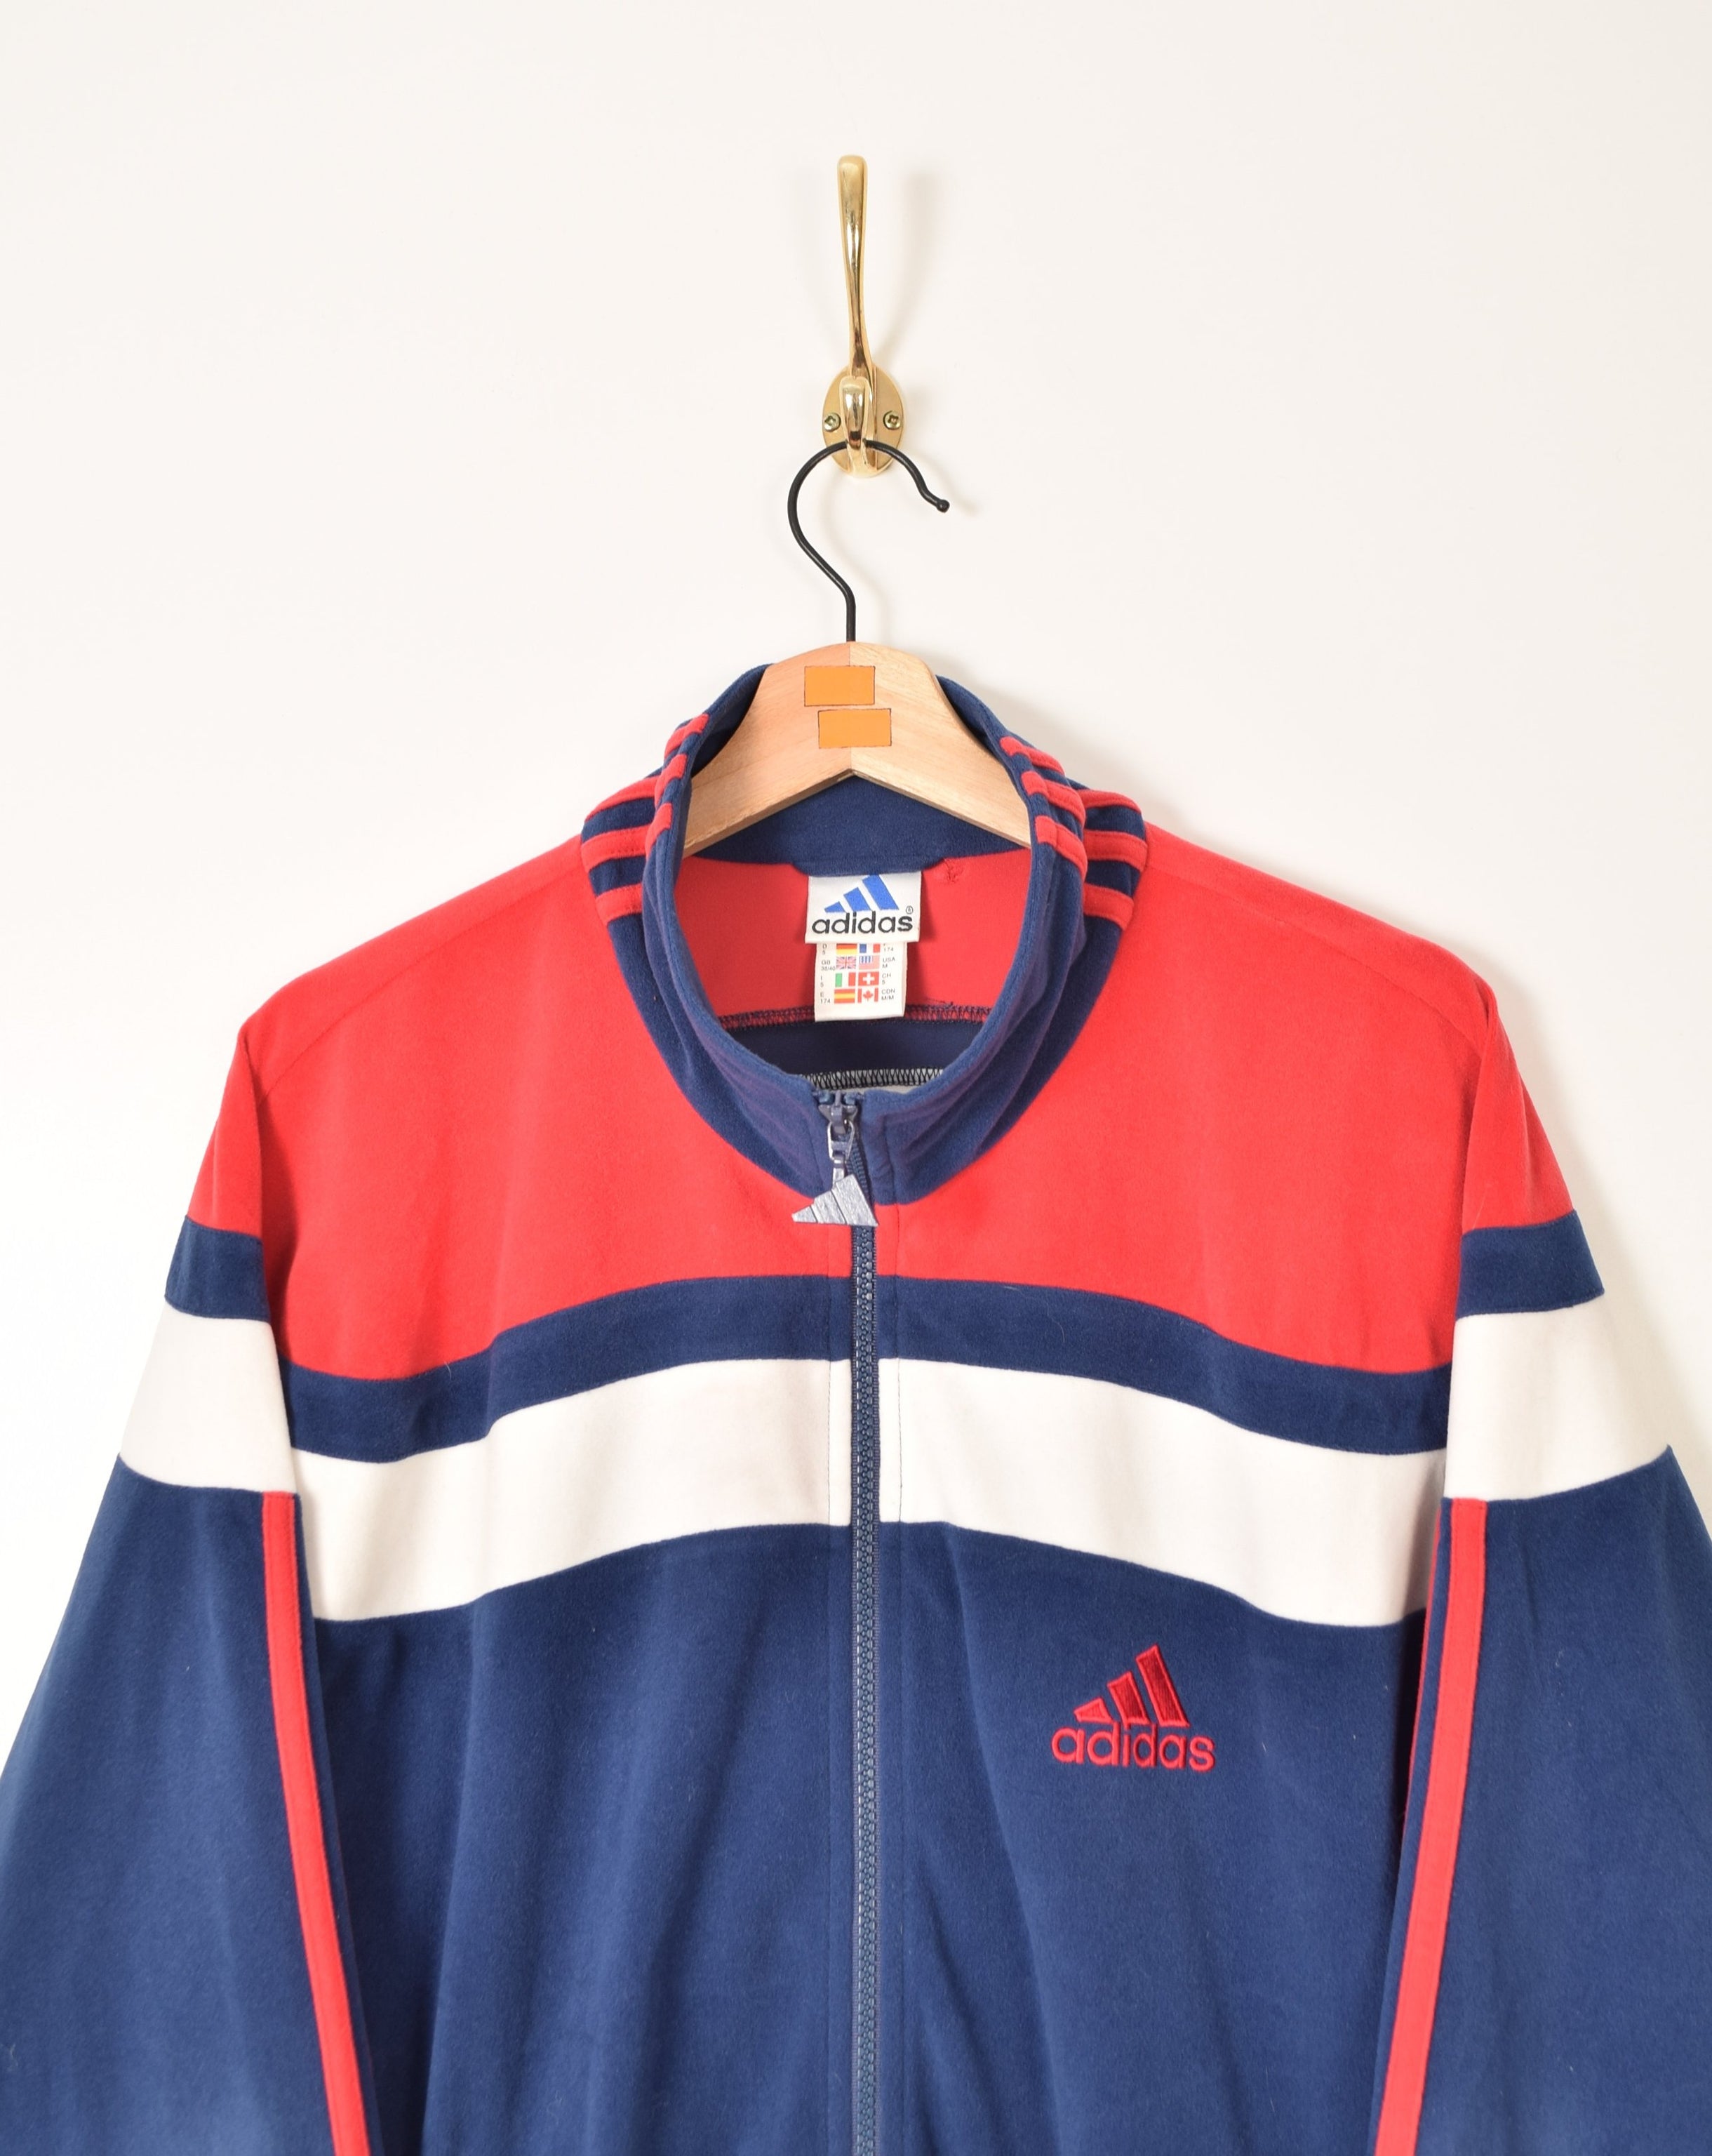 Adidas Vintage Velour Track Jacket (M) – FROM THE VINTAGE